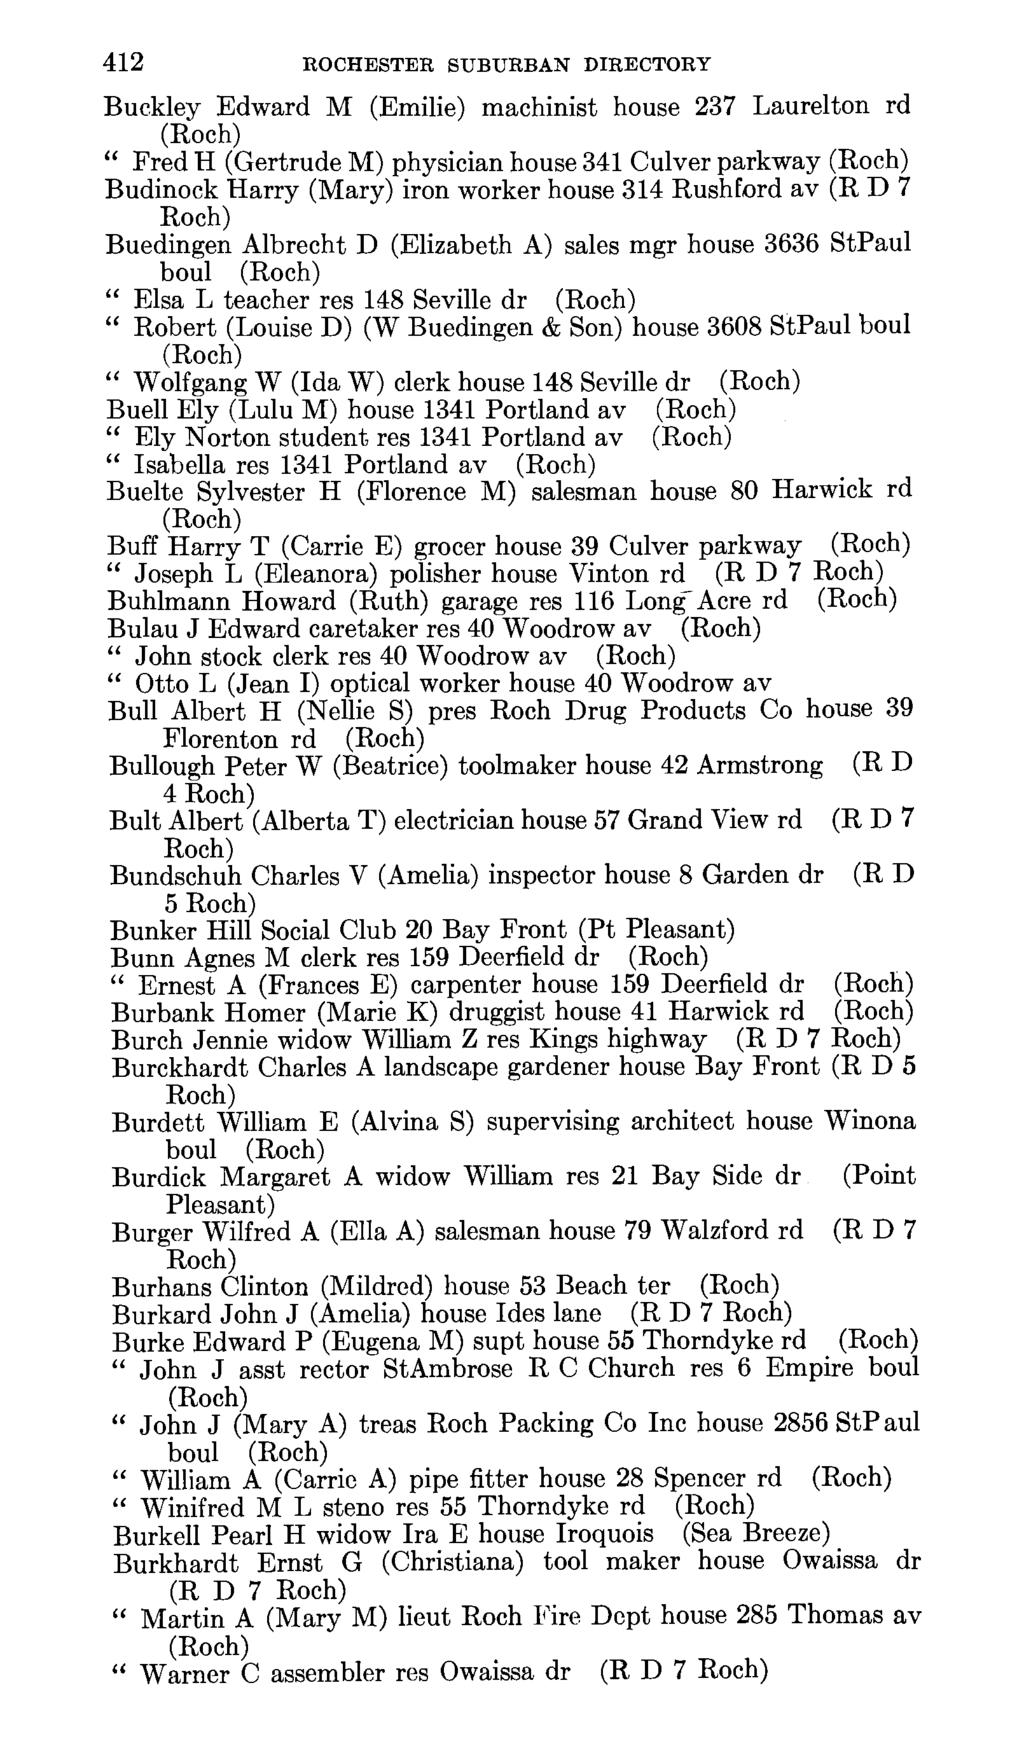 412 ROCHESTER SUBURBAN DIRECTORY Buckley Edward M (Emilie) machinist house 237 Laurelton rd Fred H (Gertrude M) physician house 341 Culver parkway Budinock Harry (Mary) iron worker house 314 Rushford